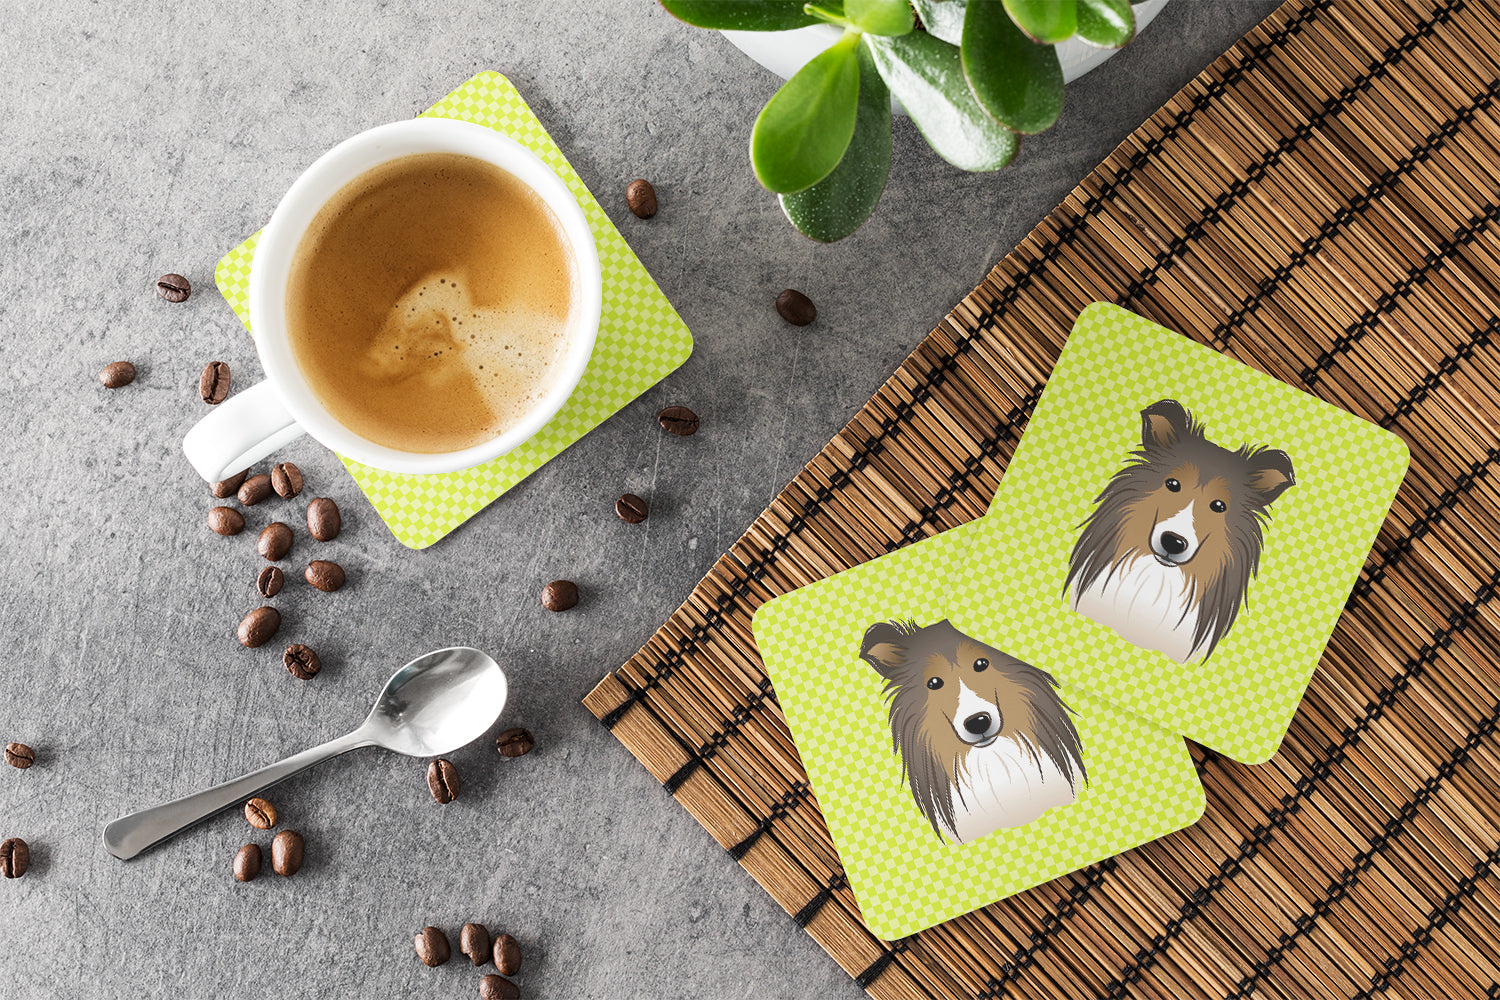 Set of 4 Checkerboard Lime Green Sheltie Foam Coasters BB1304FC - the-store.com